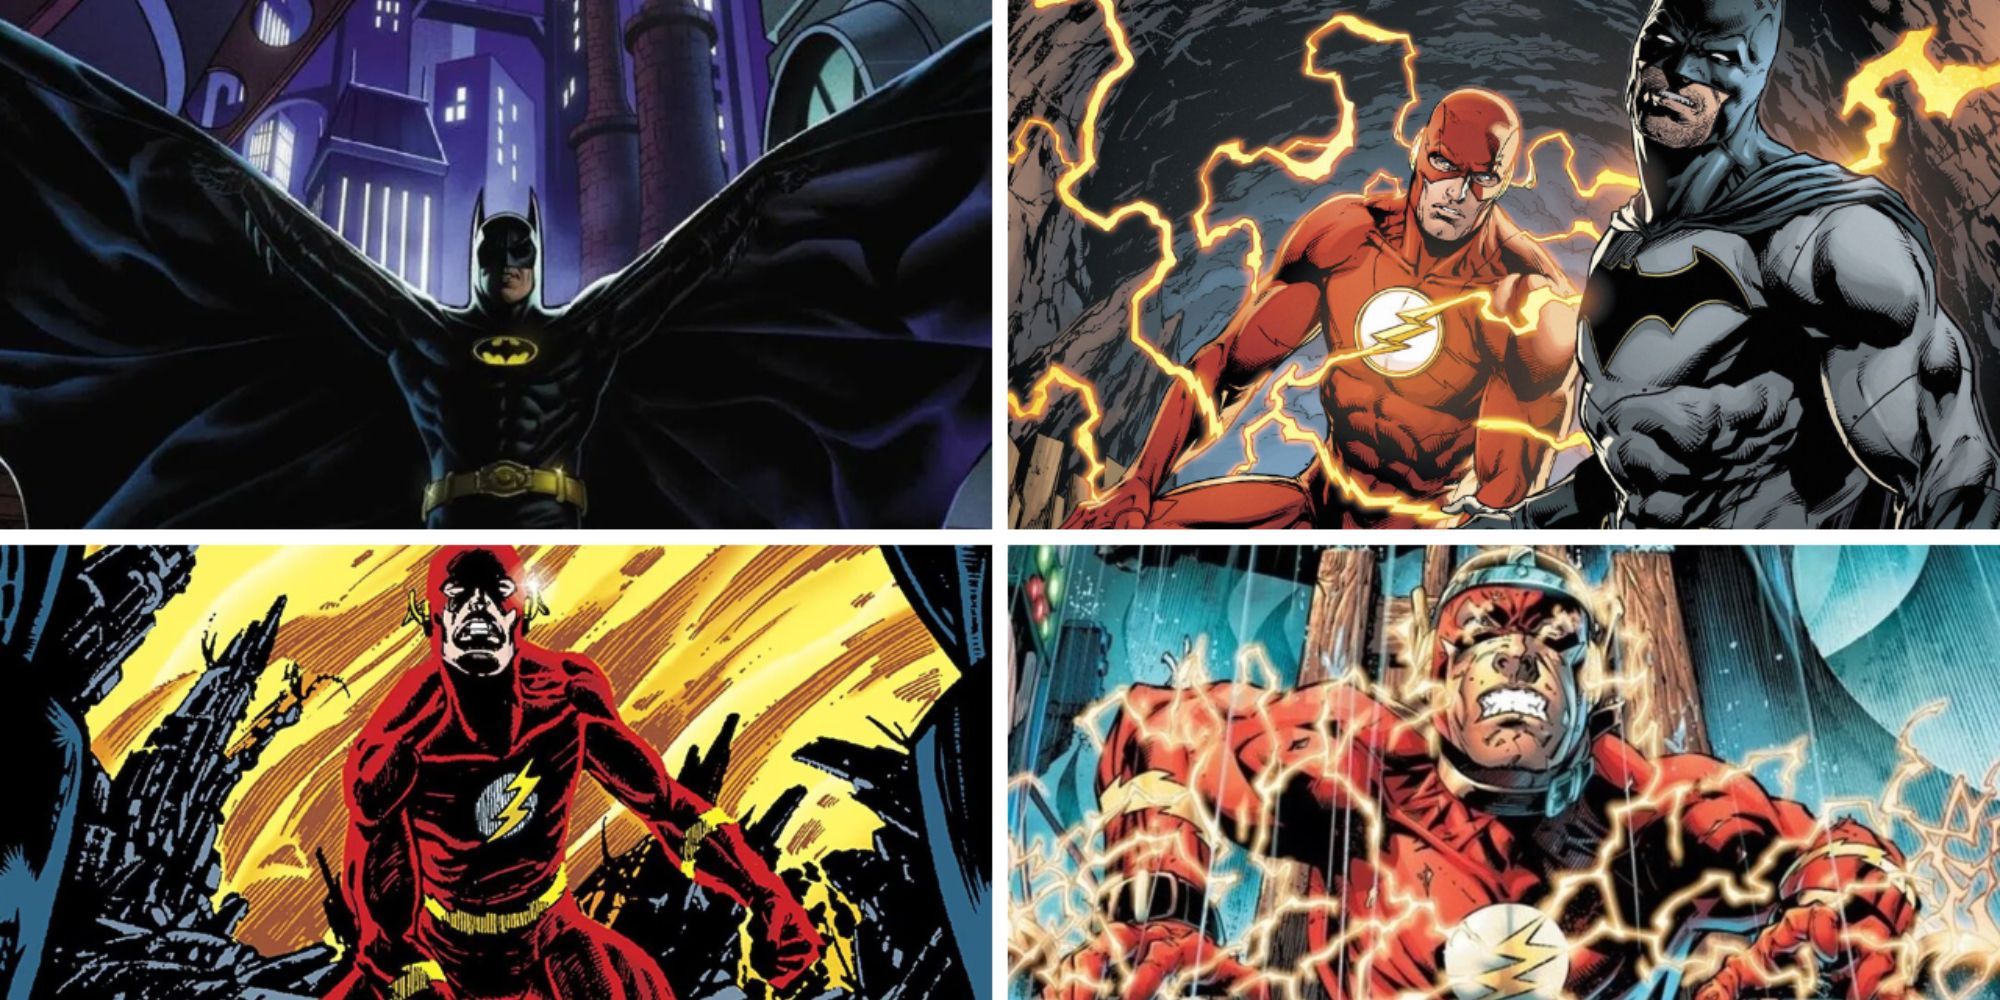 Split image of Batman '89 cover art, Batman and The Flash in The Button, The Flash in Crisis On Infinite Earths, The Flash electrically charged in Flashpoint